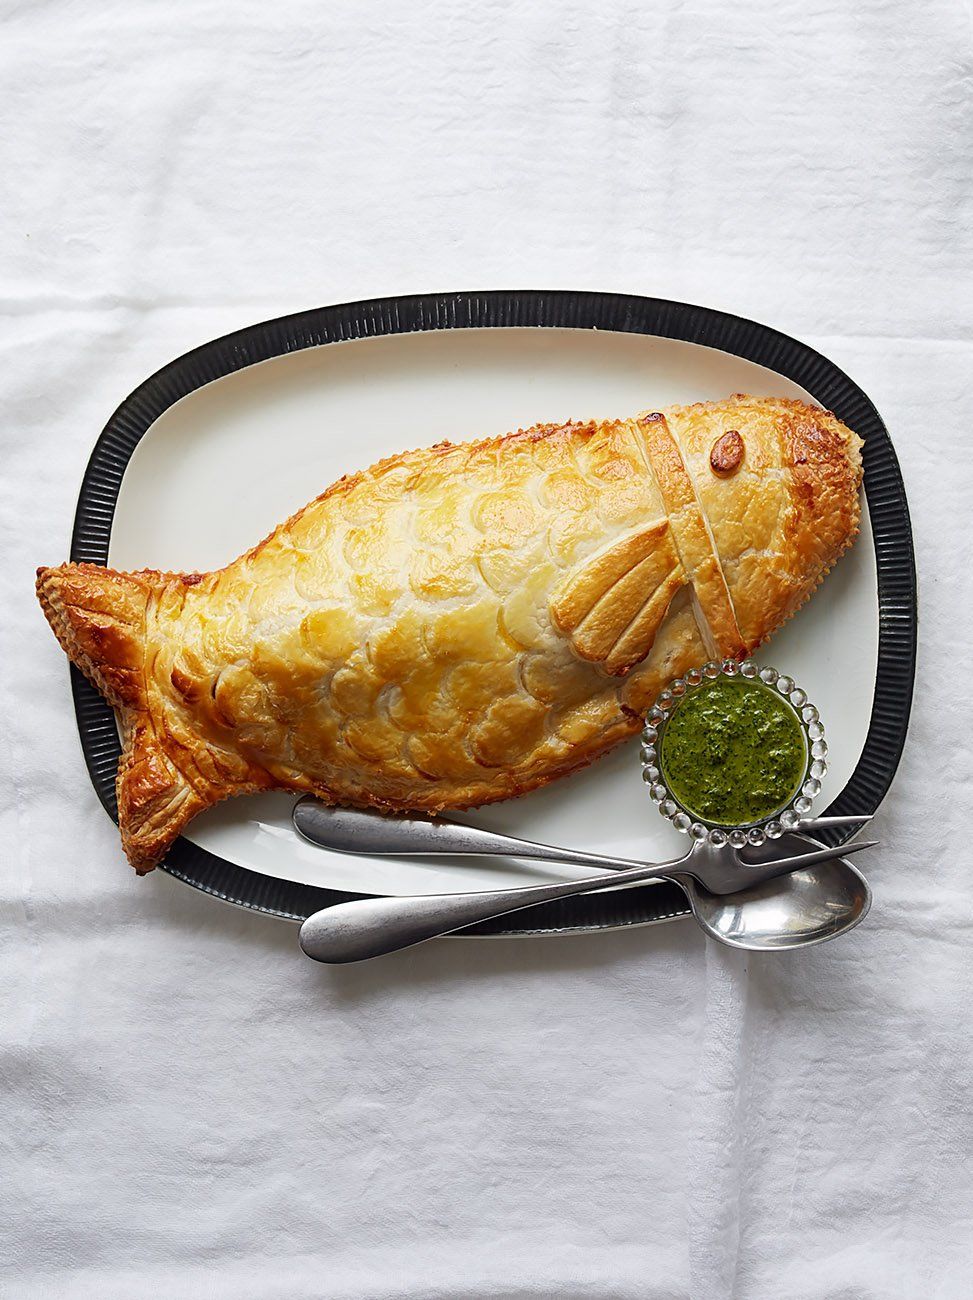 Sea bass in puff pastry